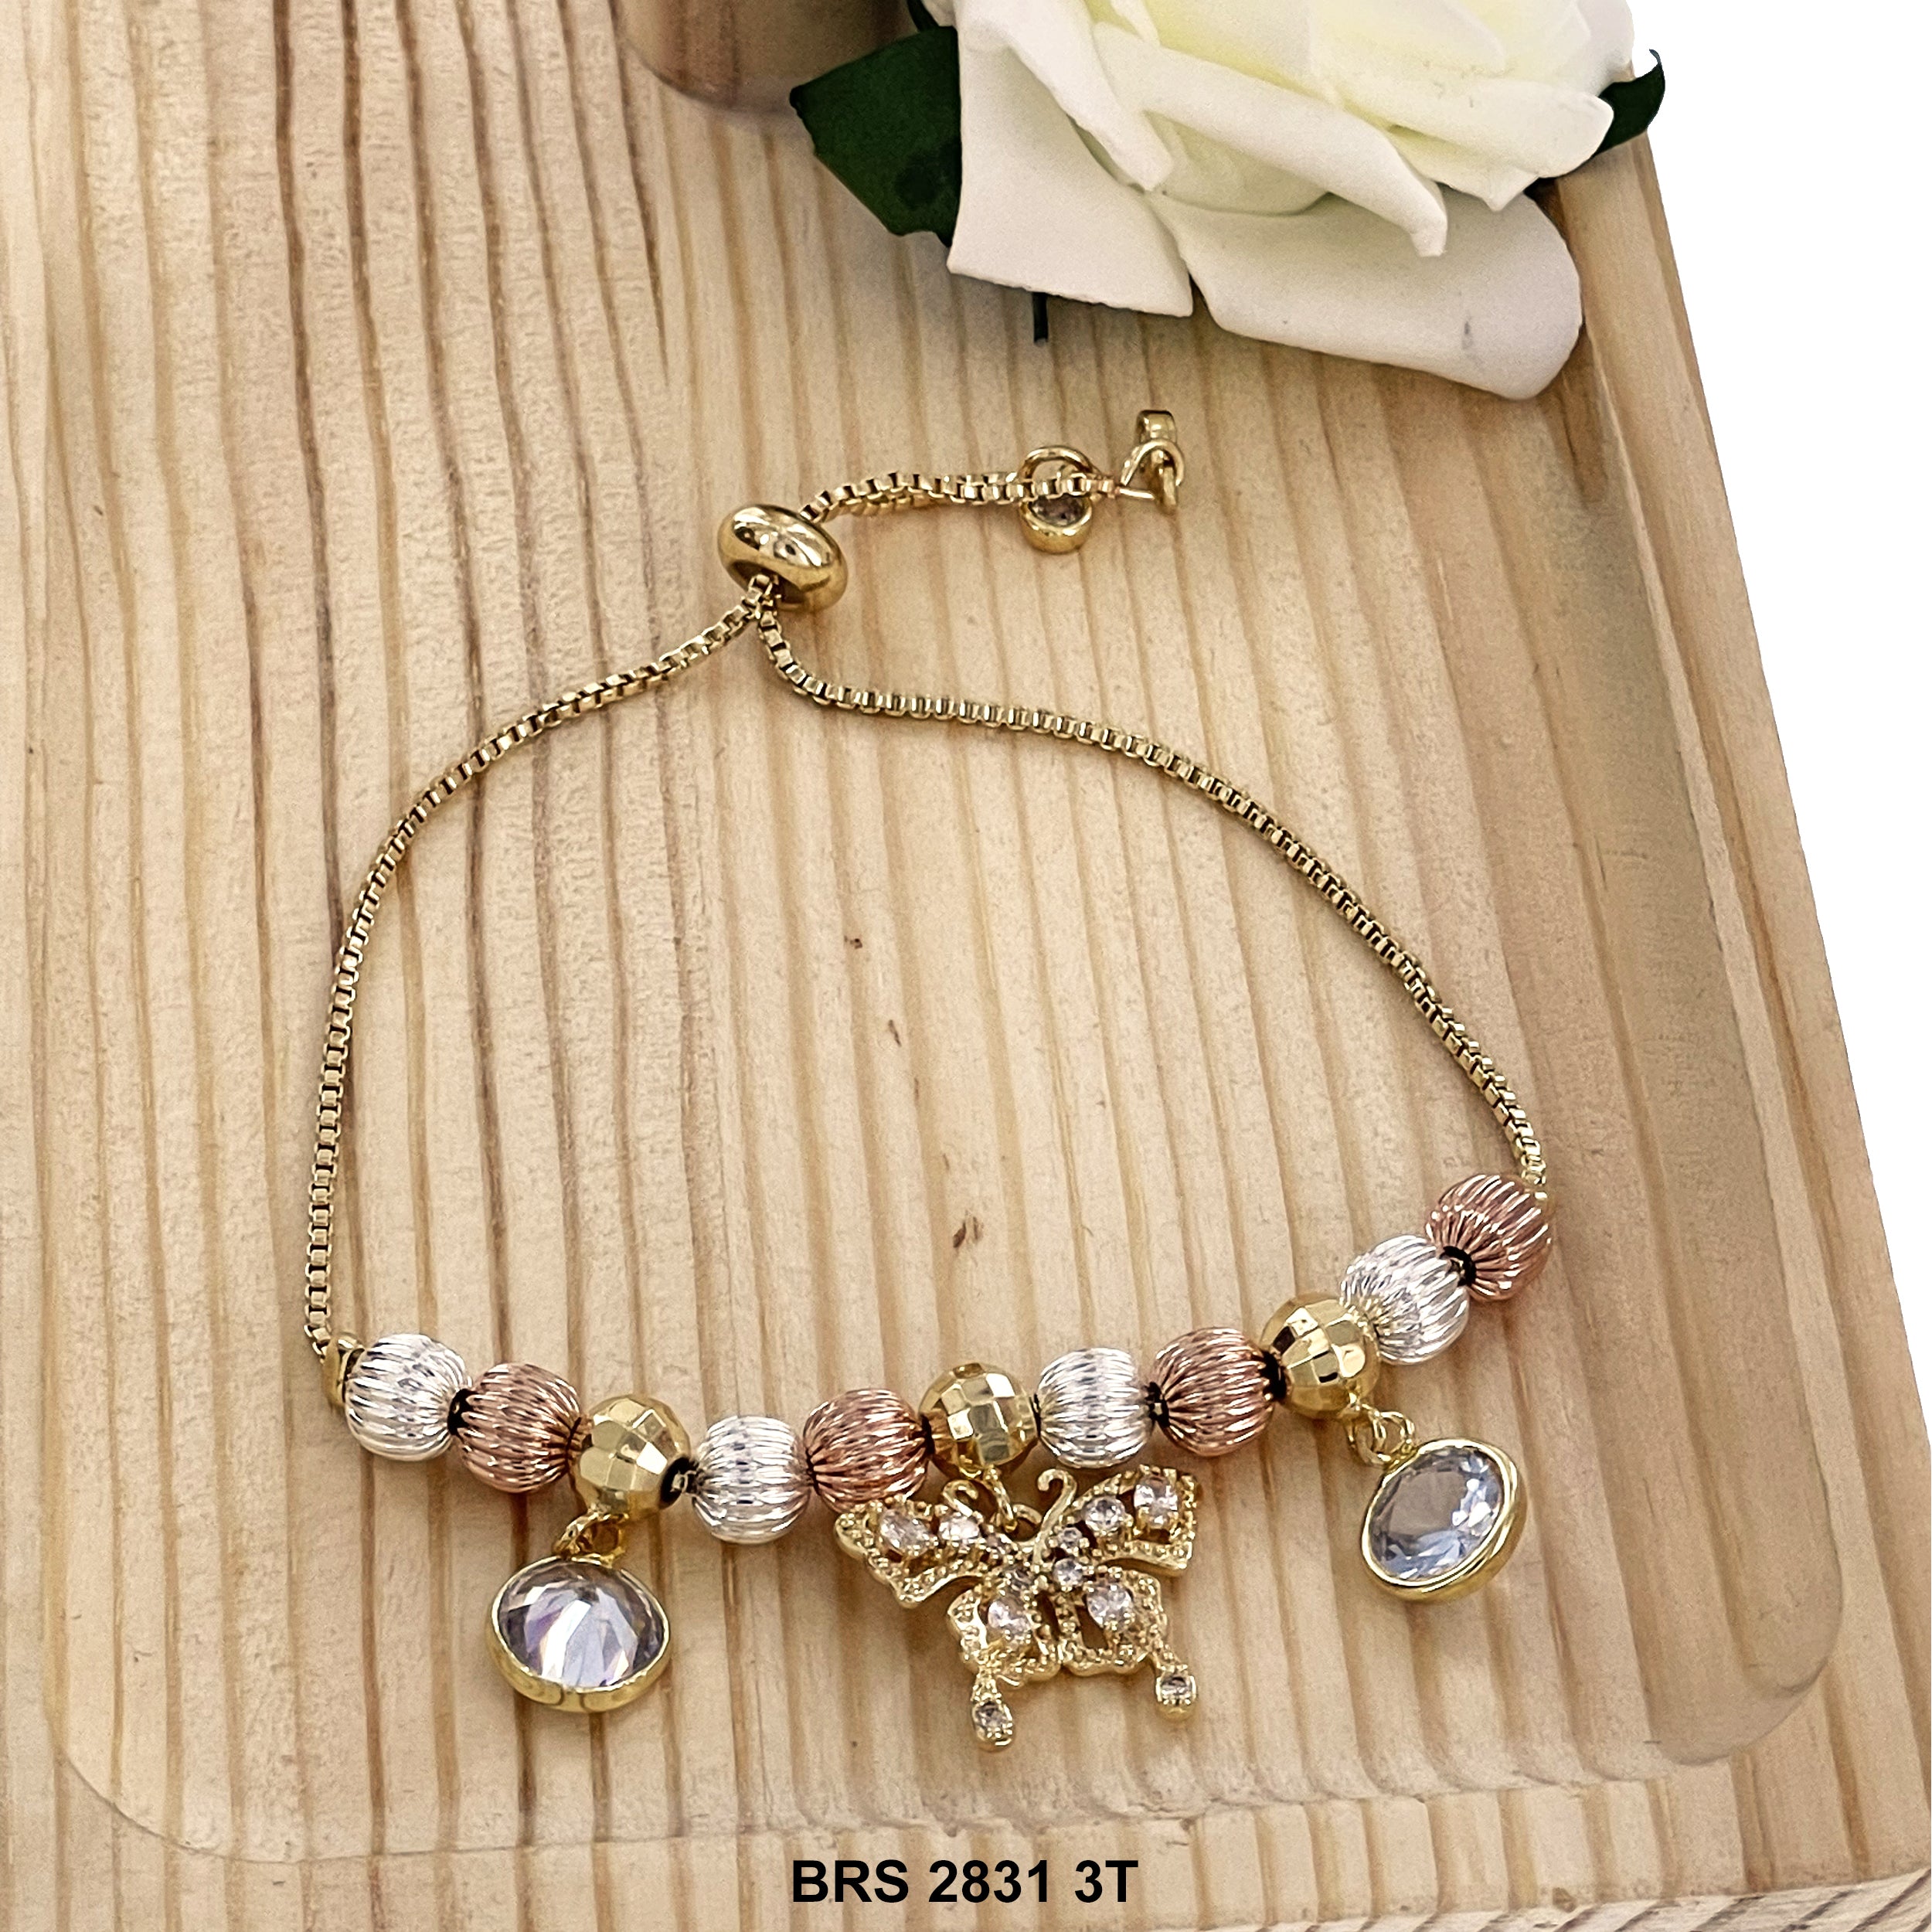 Butterfly Stoned Charms Chinese Lantern Beads Adjustable Bracelet BRS 2831 3T